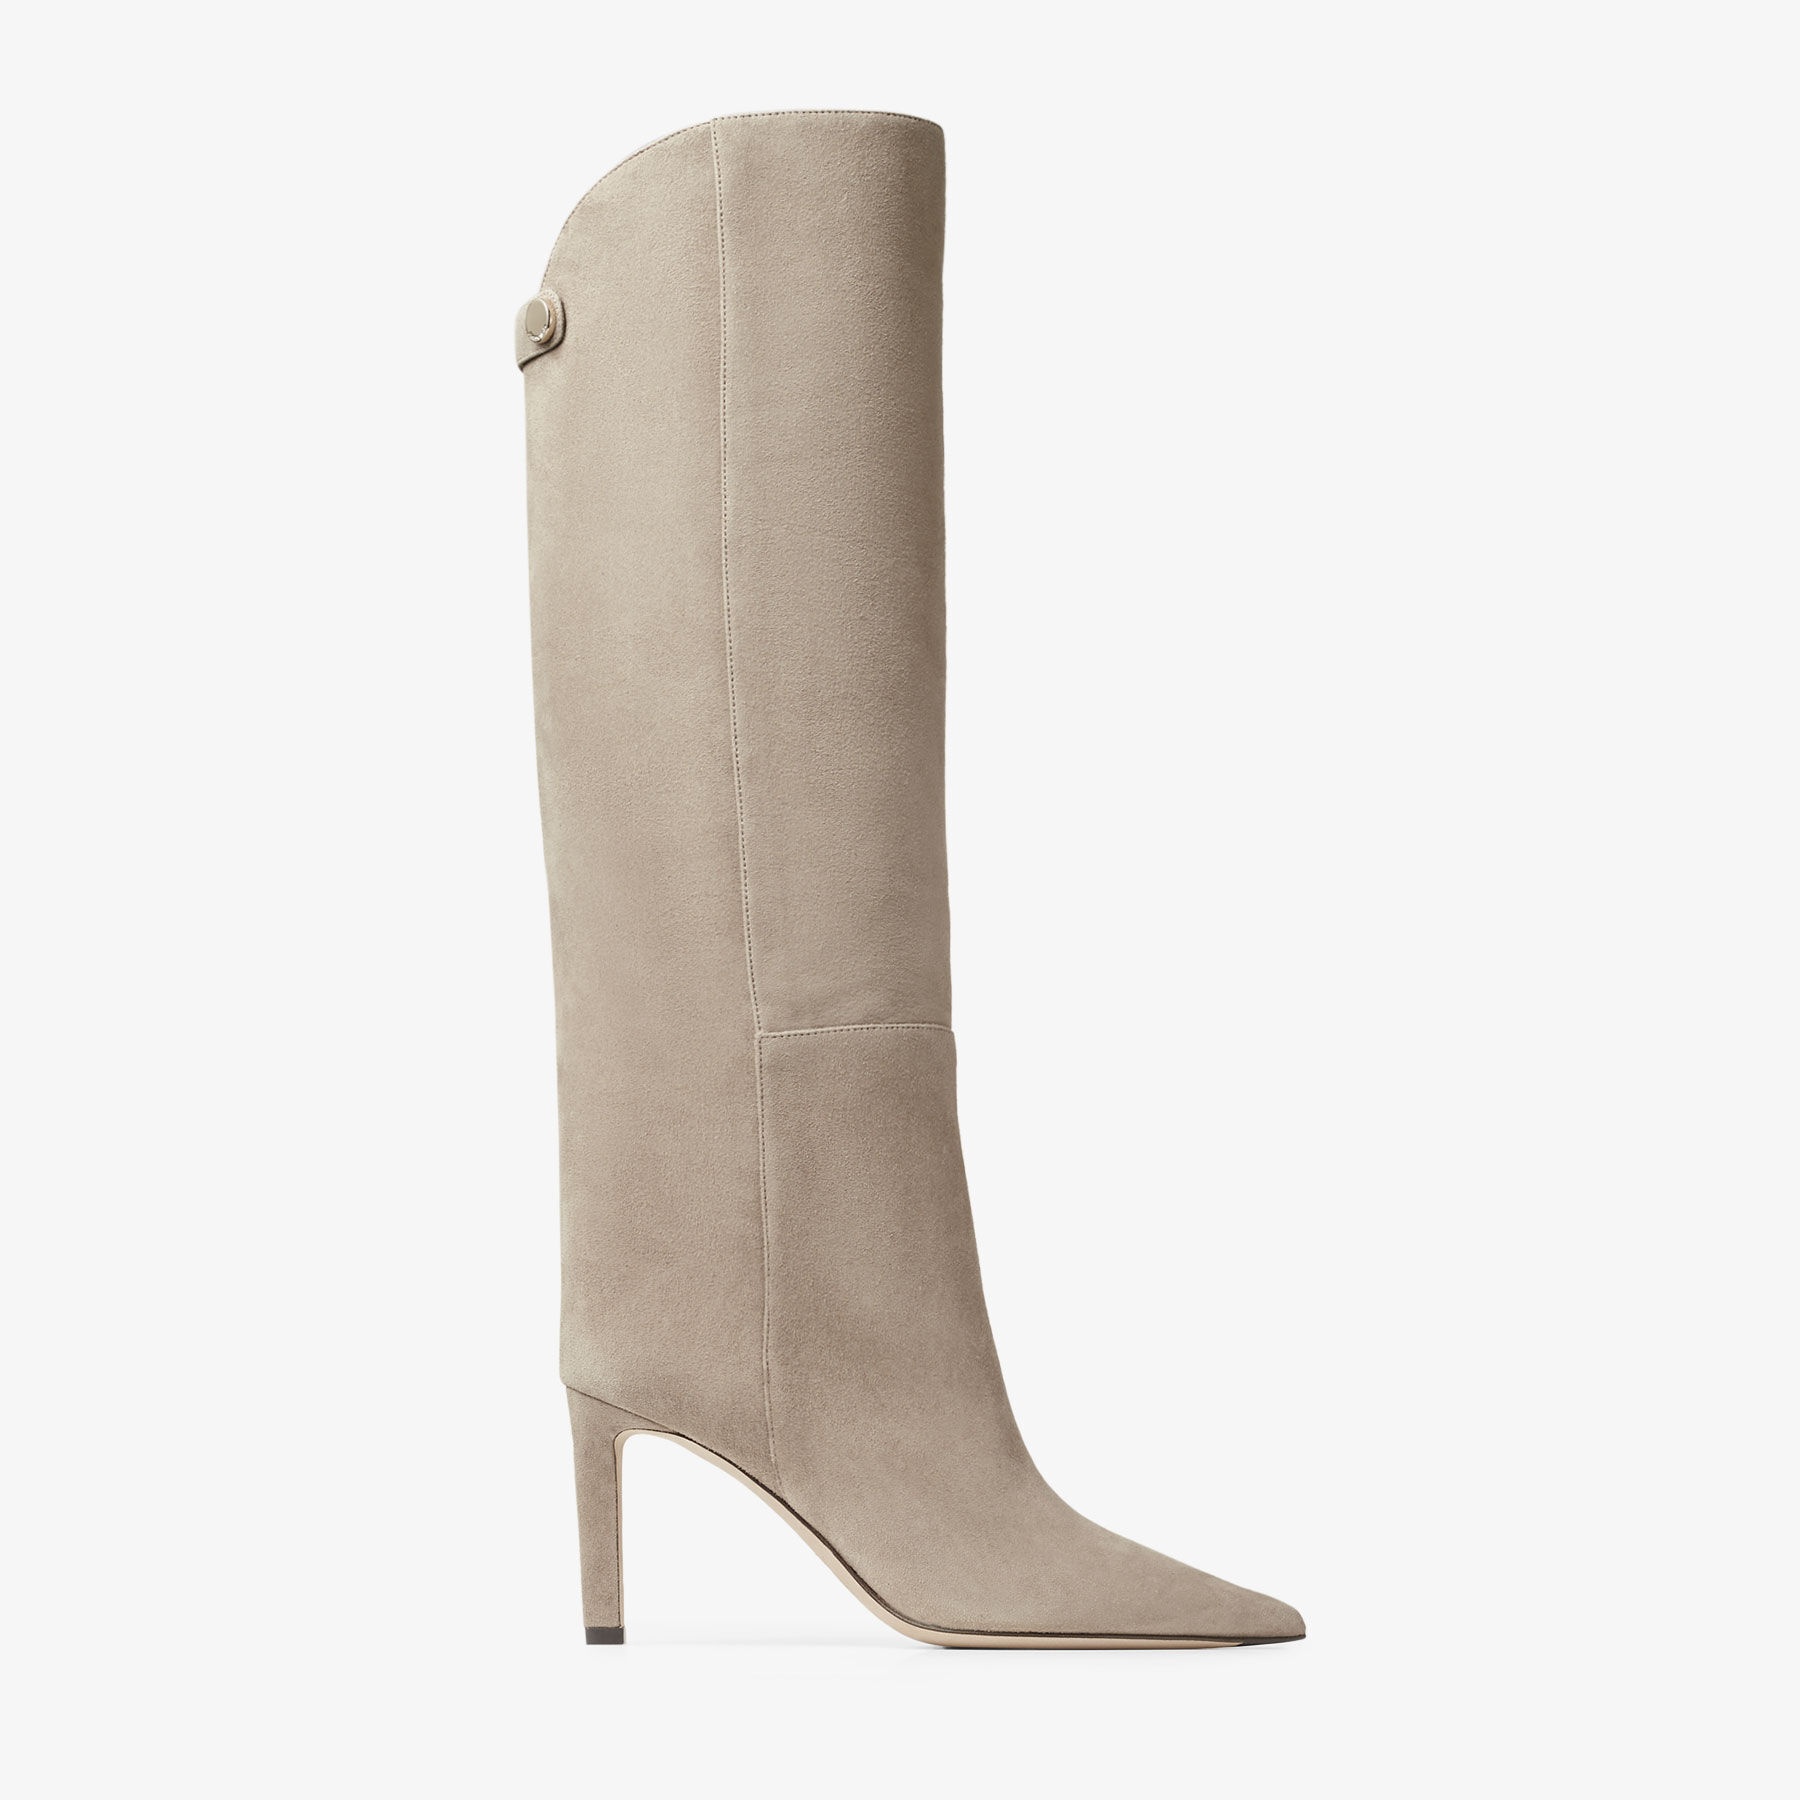 Alizze Knee Boot 85
Taupe Suede Knee-High Boots - 1